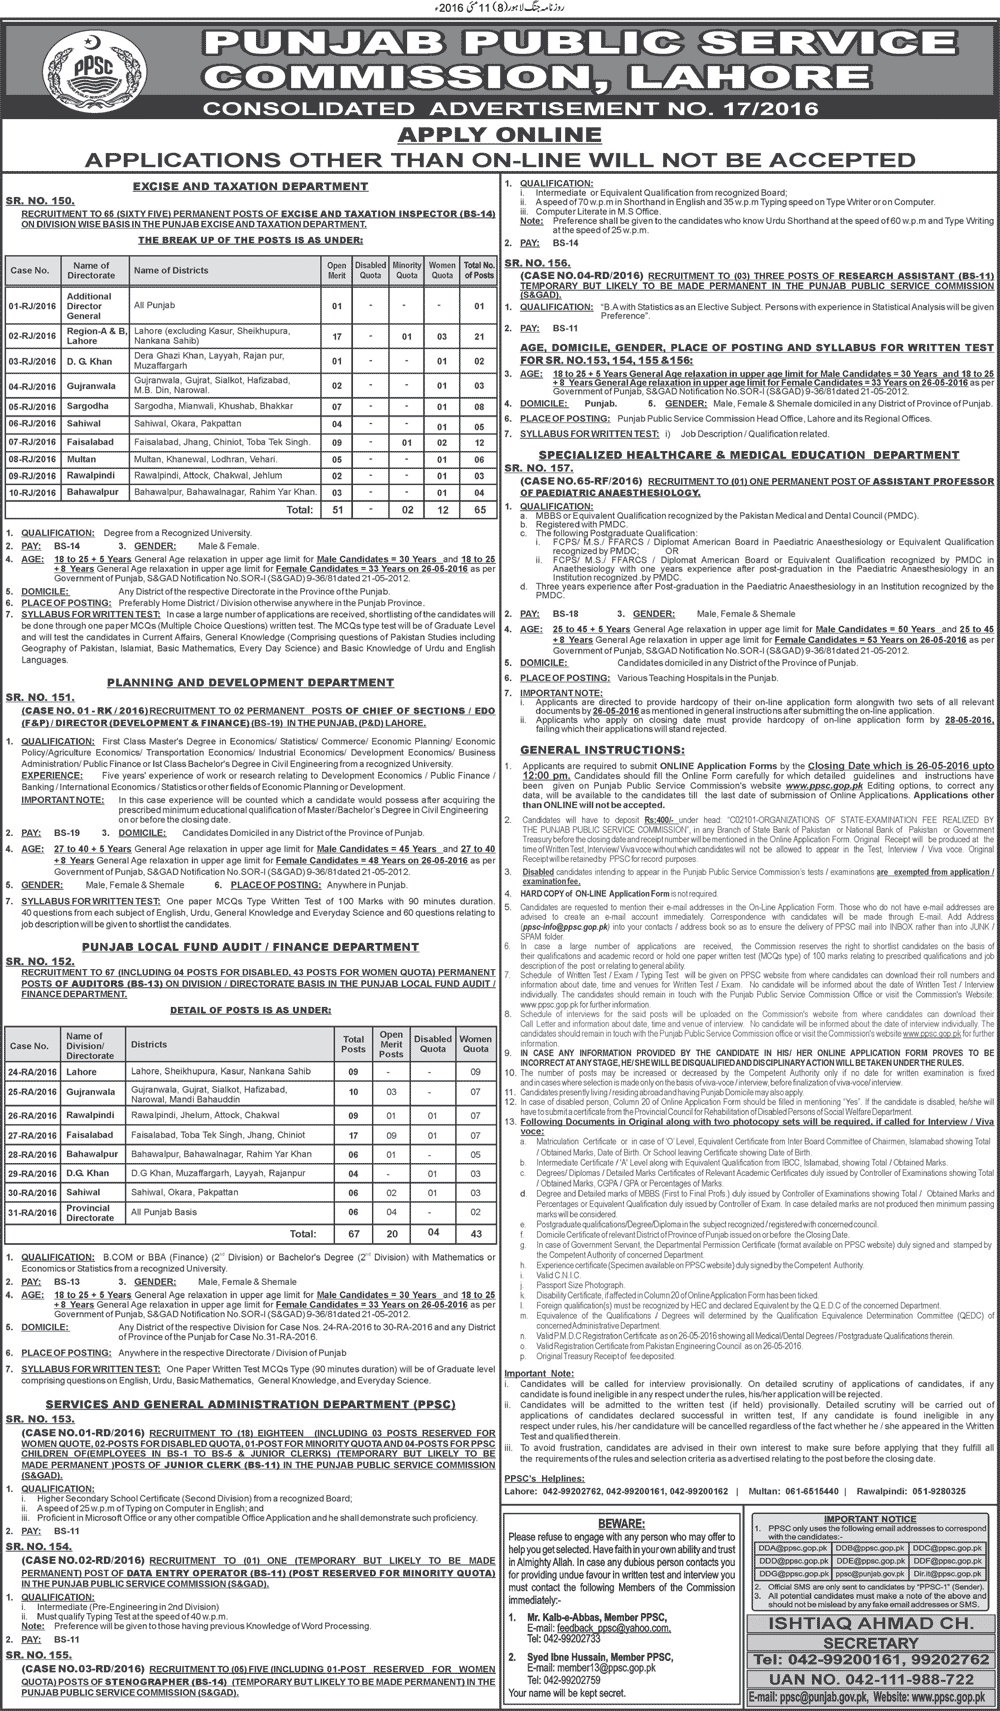 PPSC Excise And Taxation Inspector Jobs 2016 Apply Online, Test Syllabus